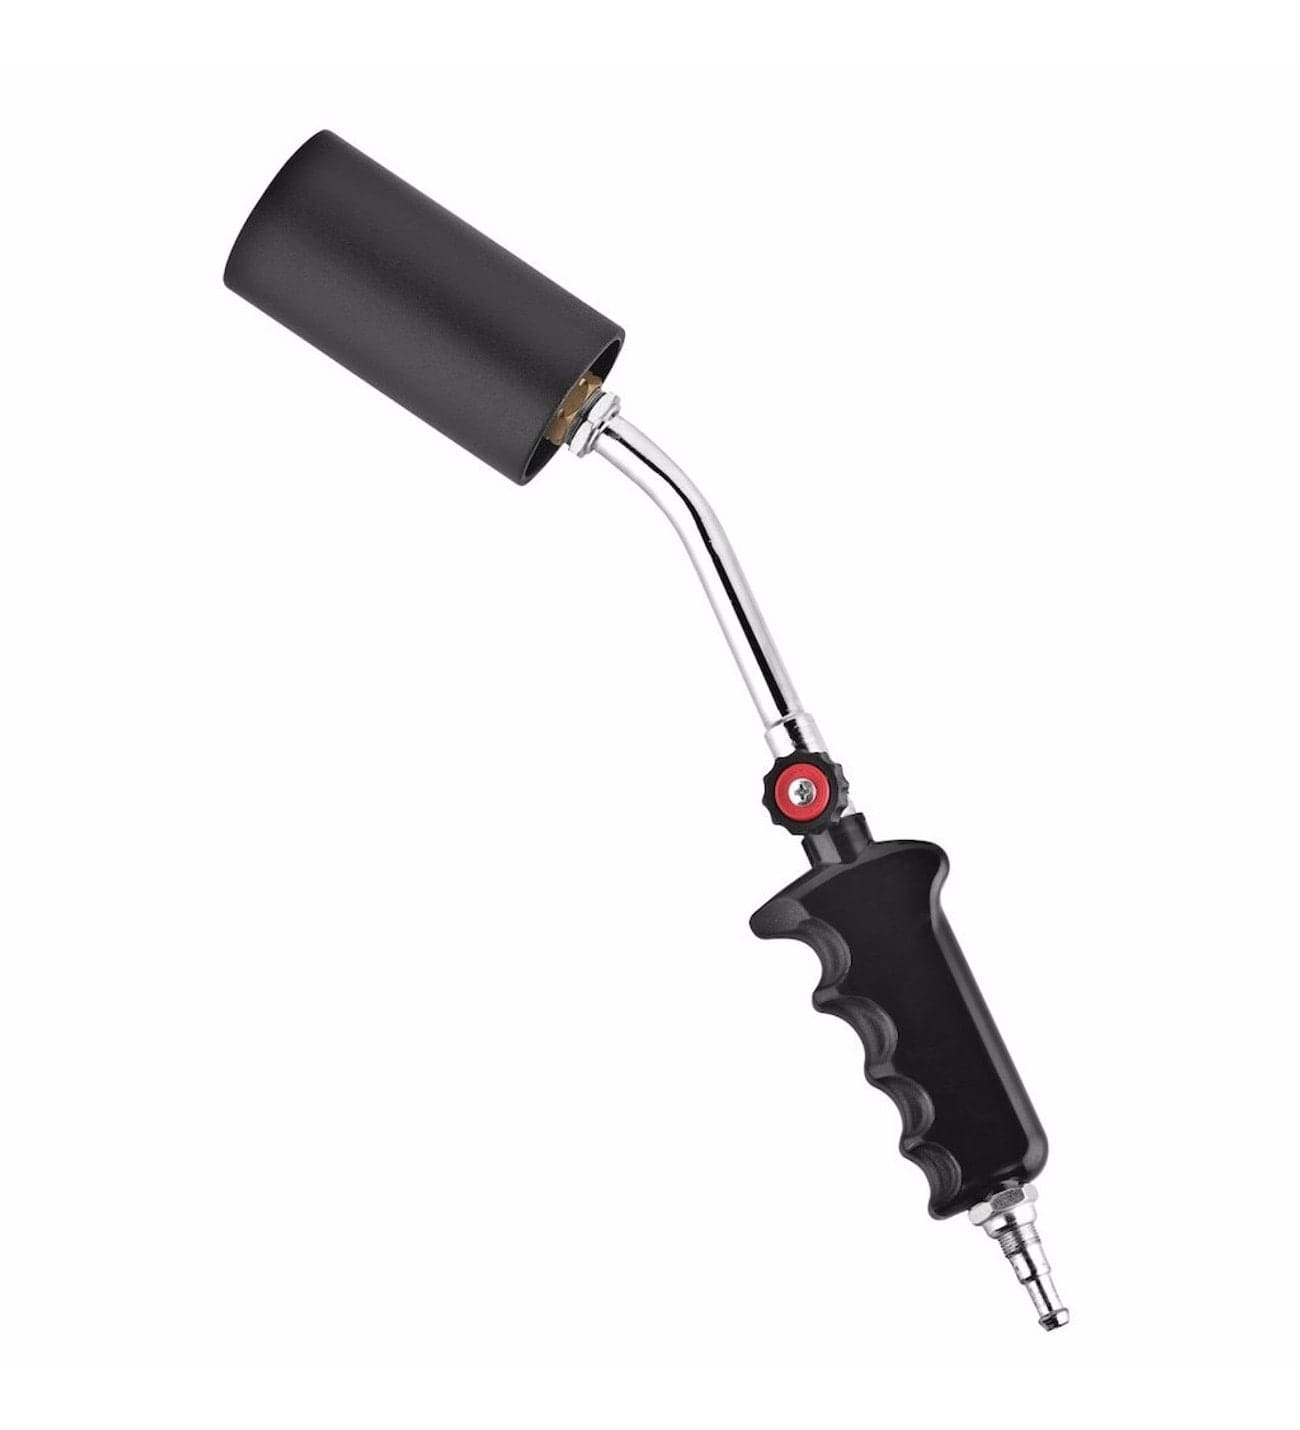 SGS Gas Torch with Valve 75cm - SGSV75 | Supply Master | Accra, Ghana Welding Machine & Accessories Buy Tools hardware Building materials